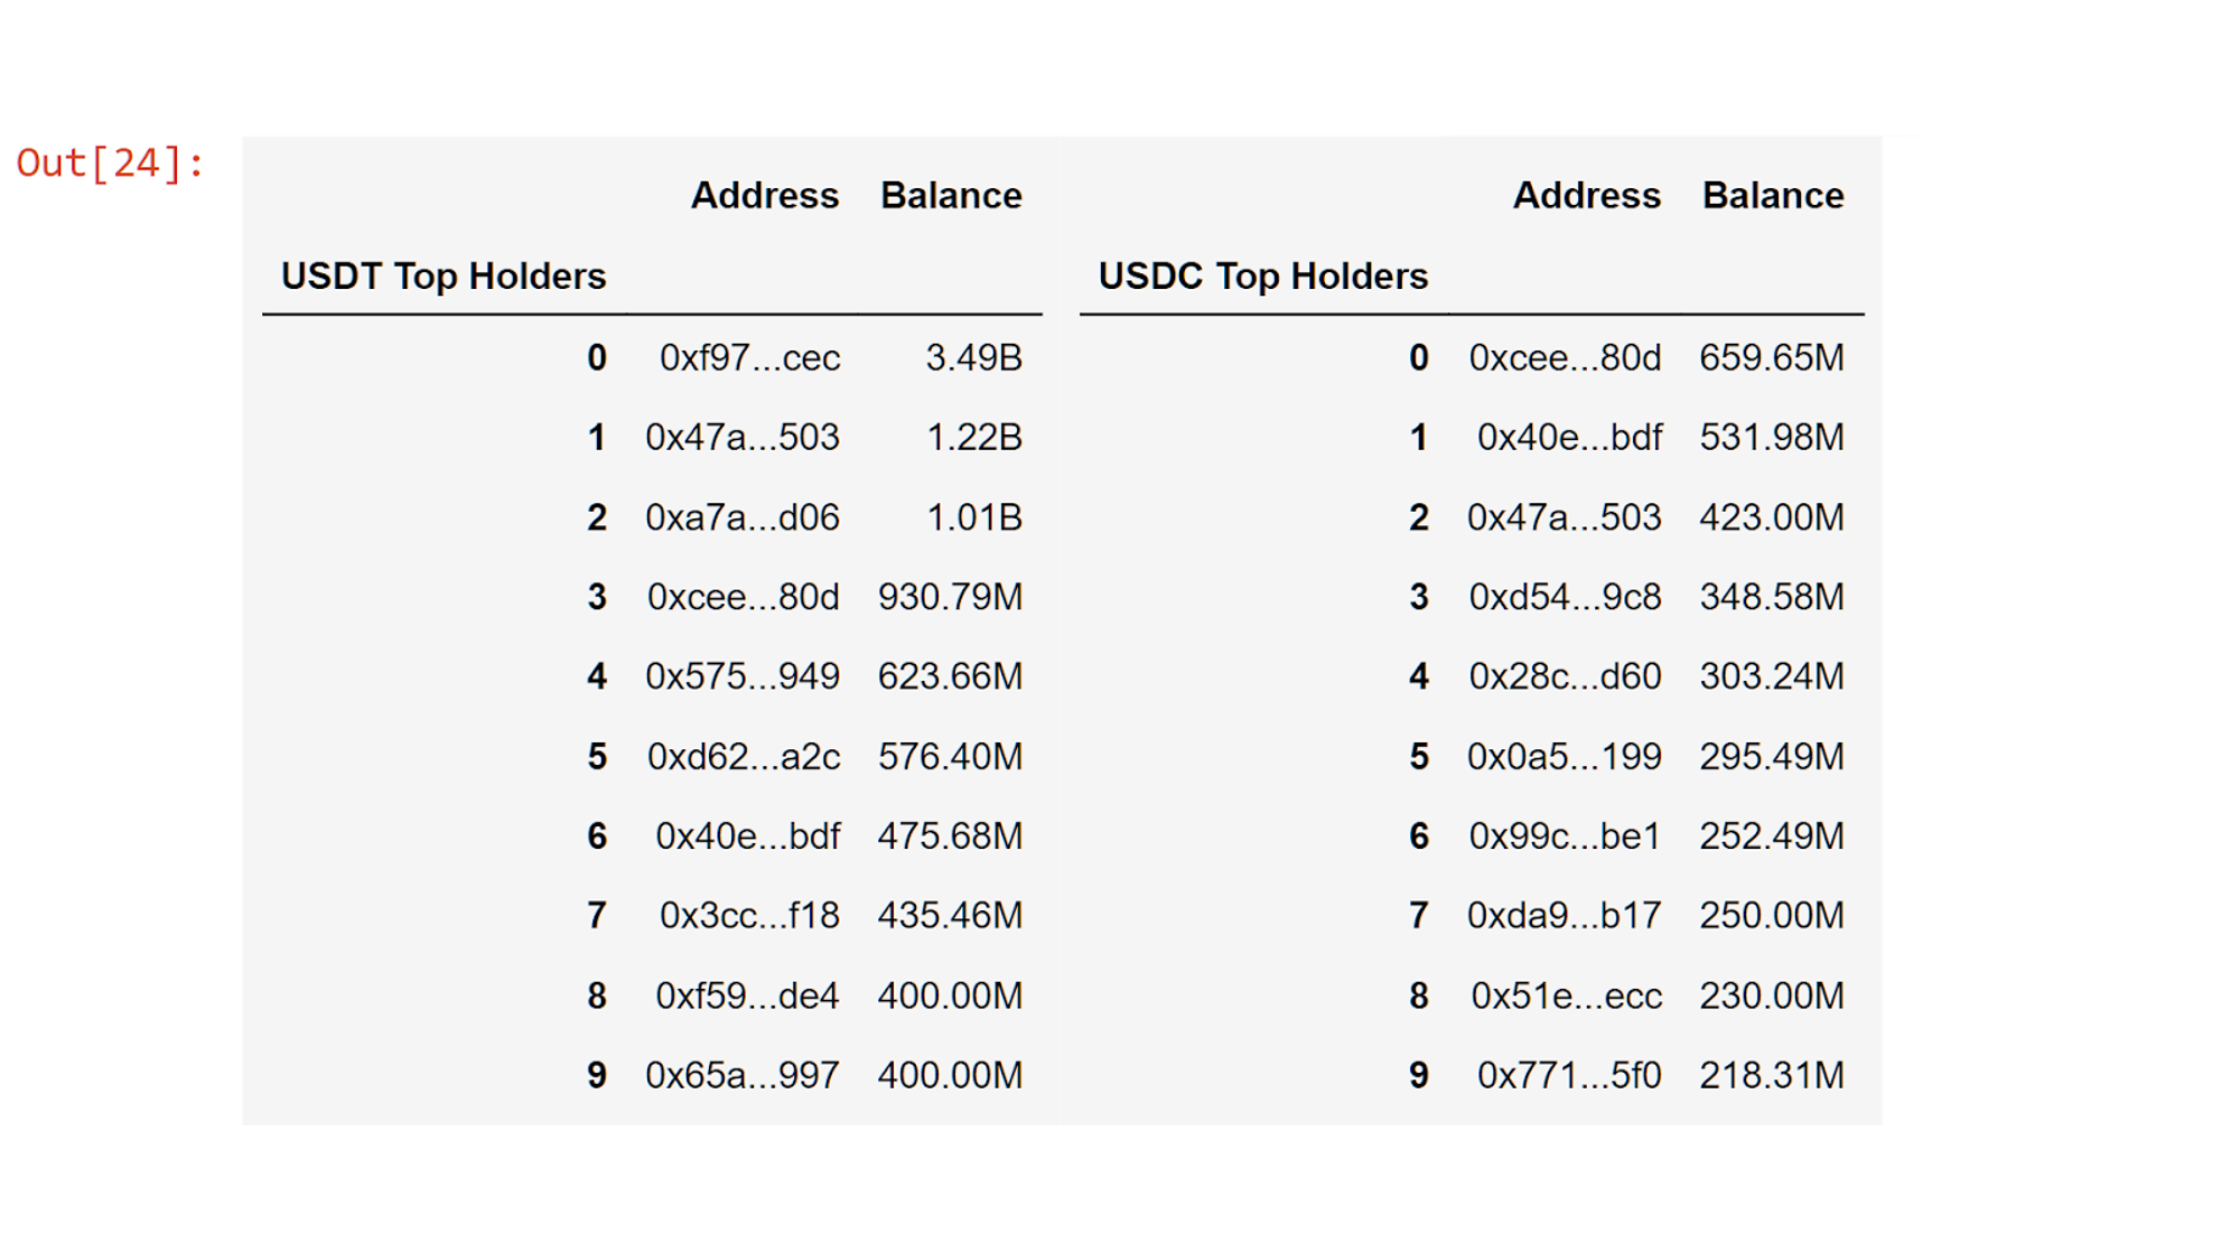 Table of Top Token Holders for USDC and USDT